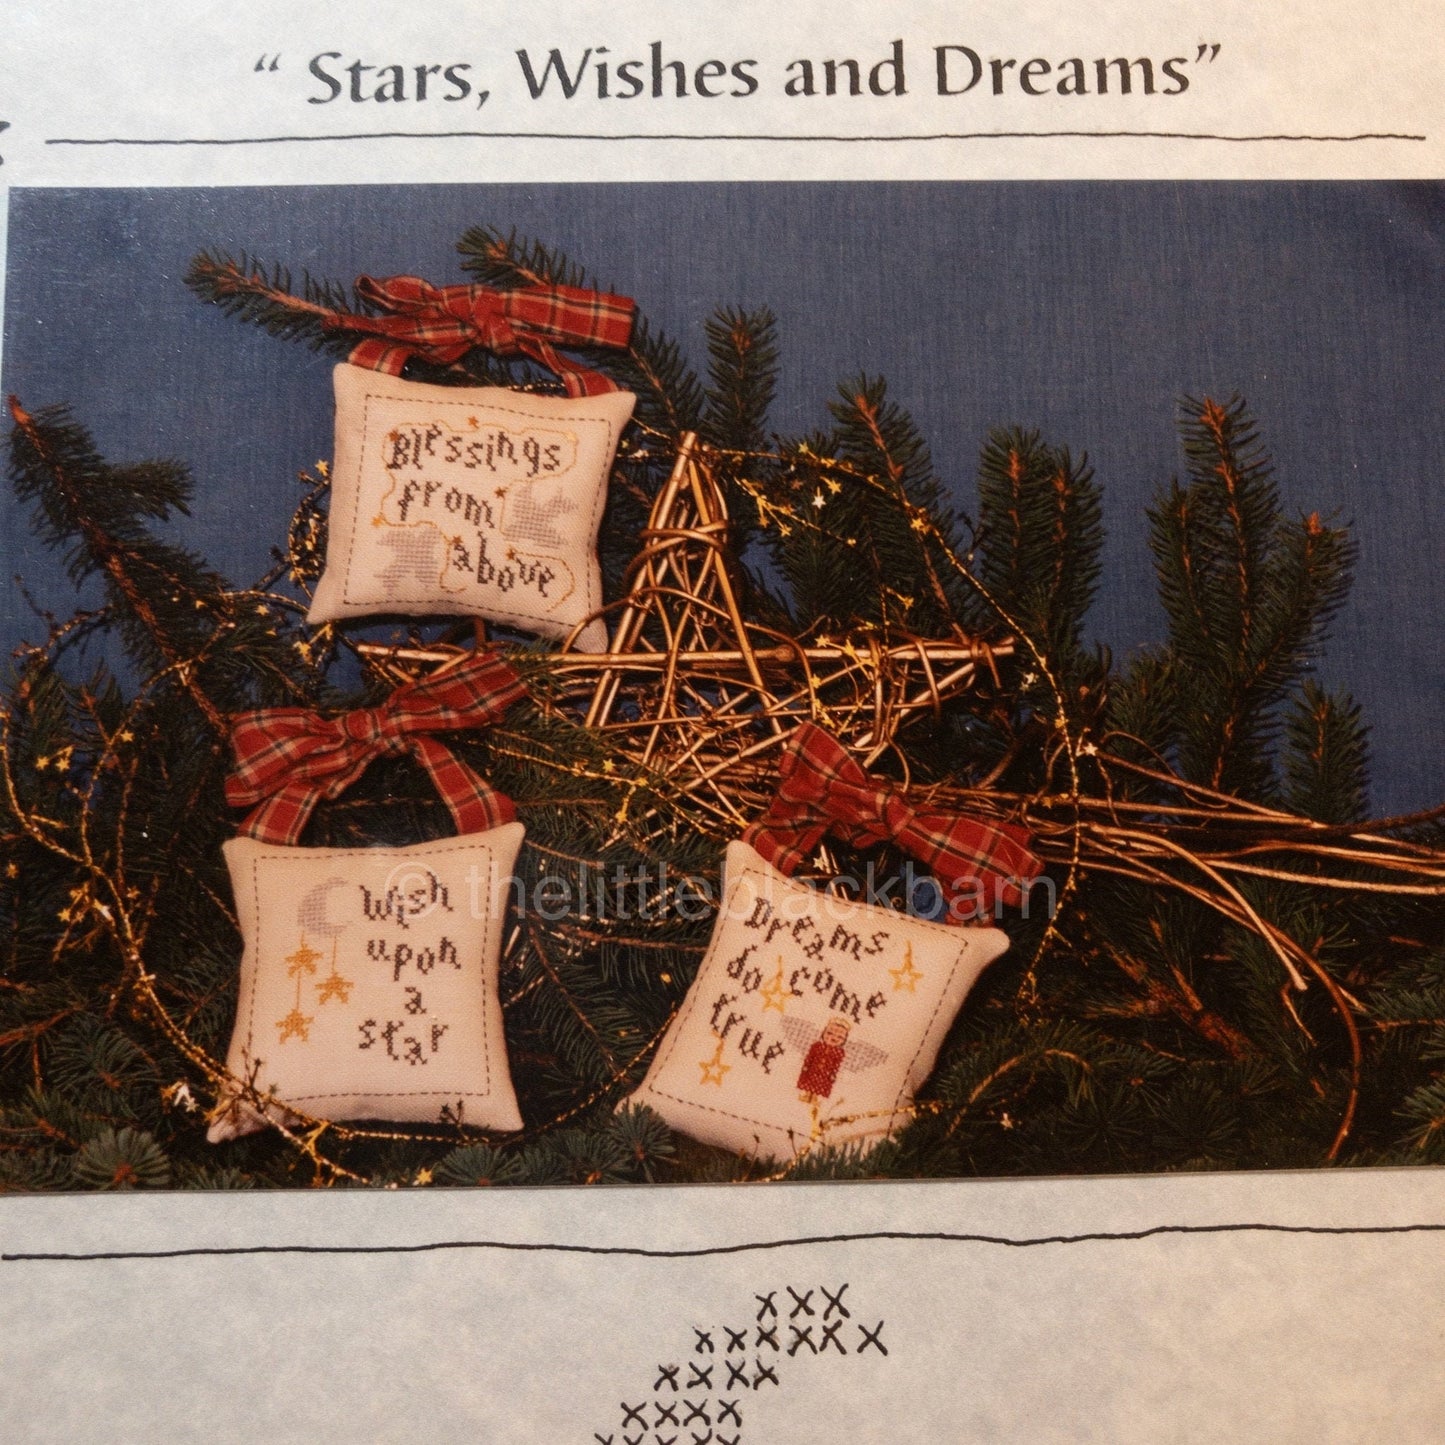 Stitches By Cheri, Stars, Wishes and Dreams, Vintage 1997*